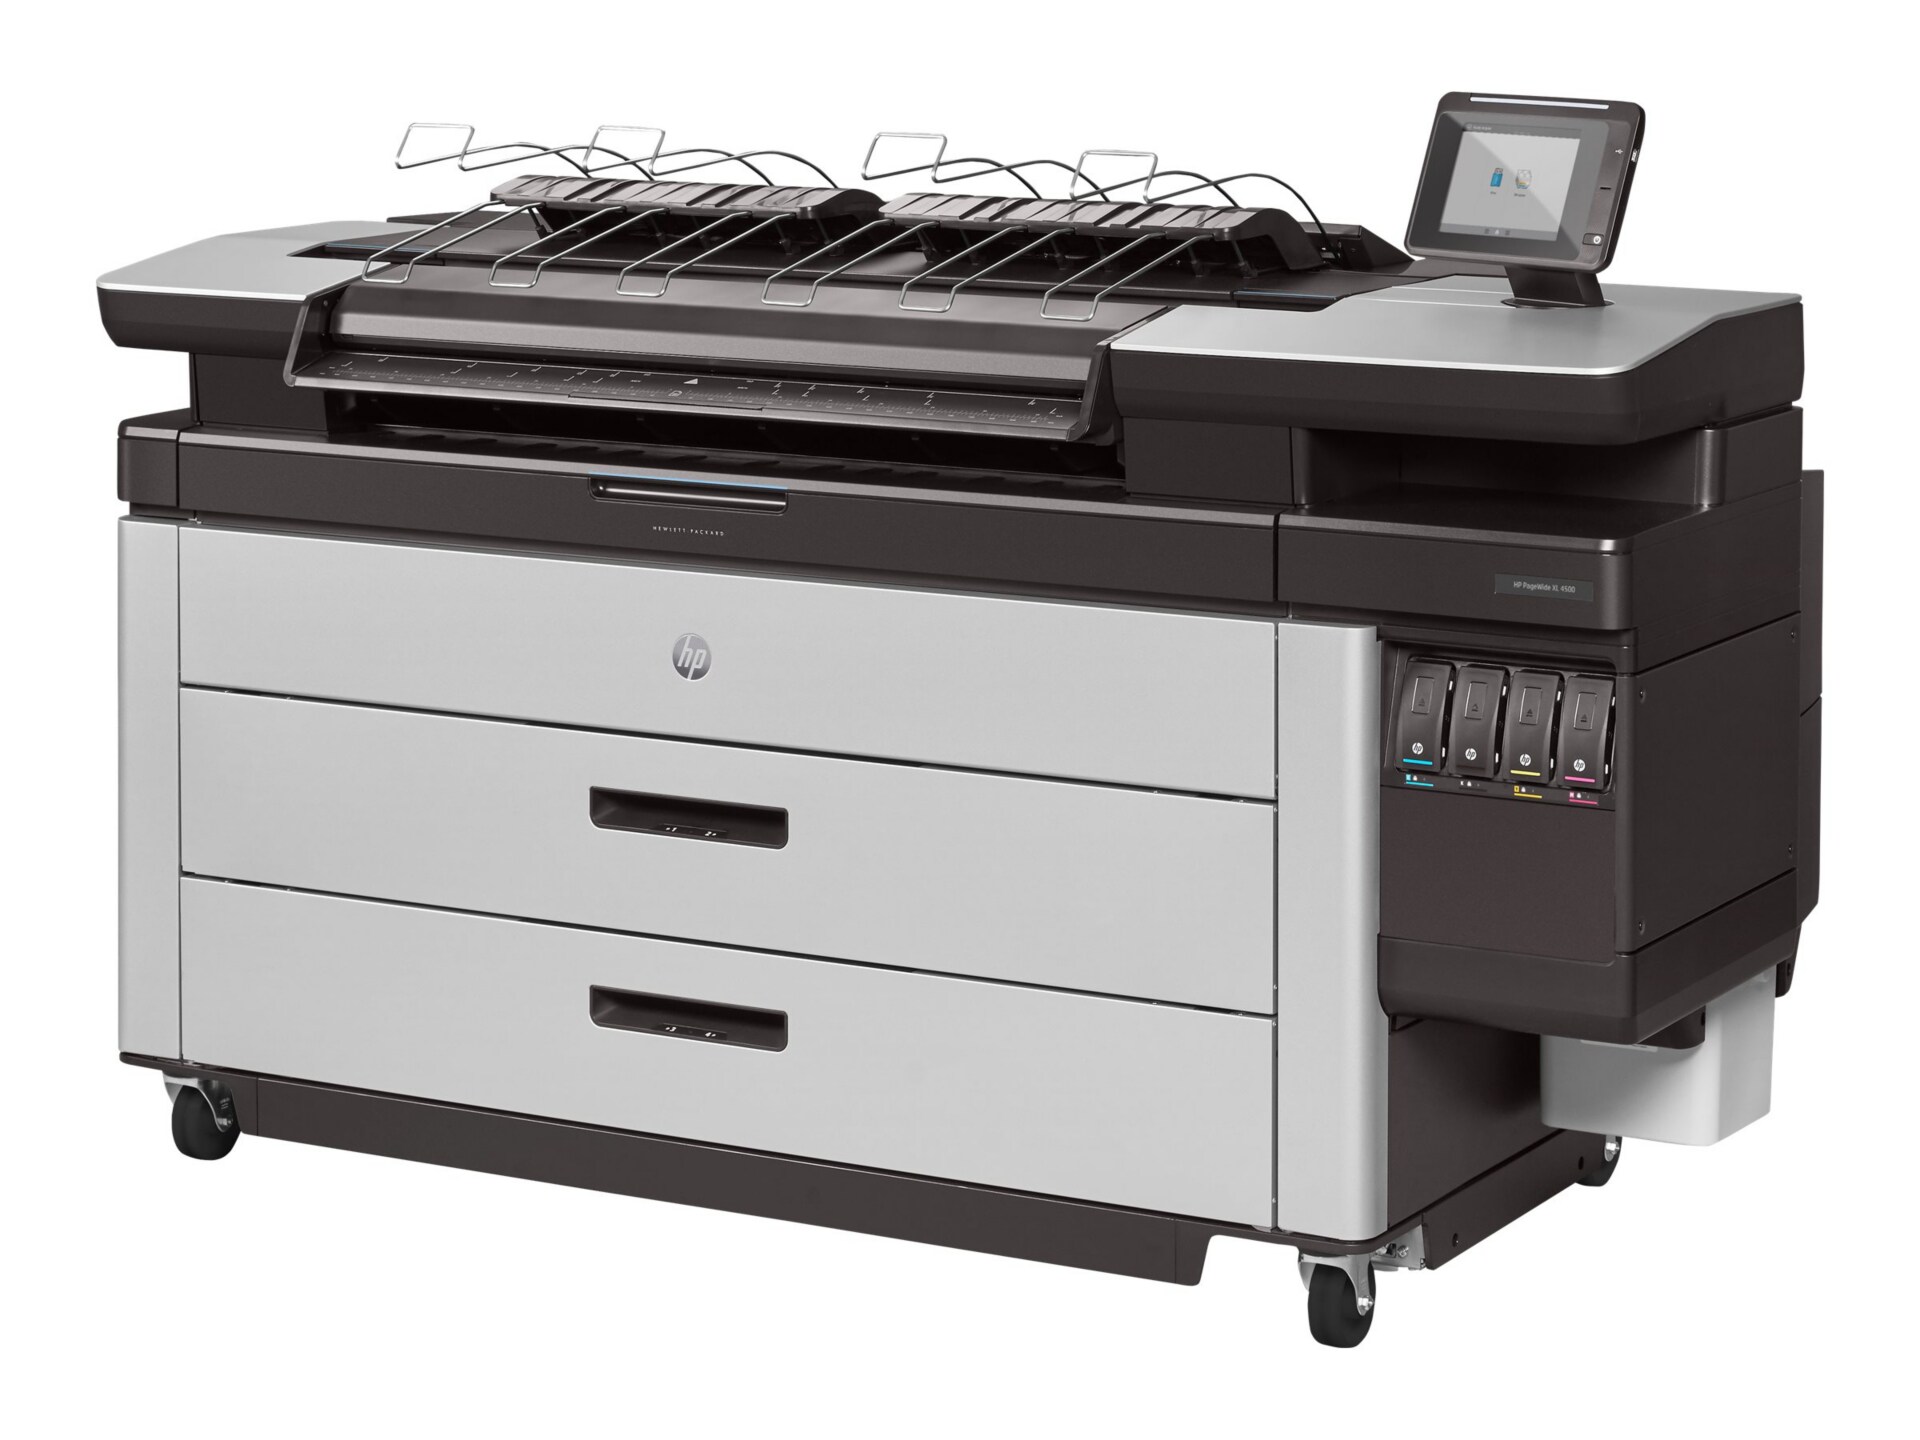 HP PageWide XL 4500 - multifunction printer - color